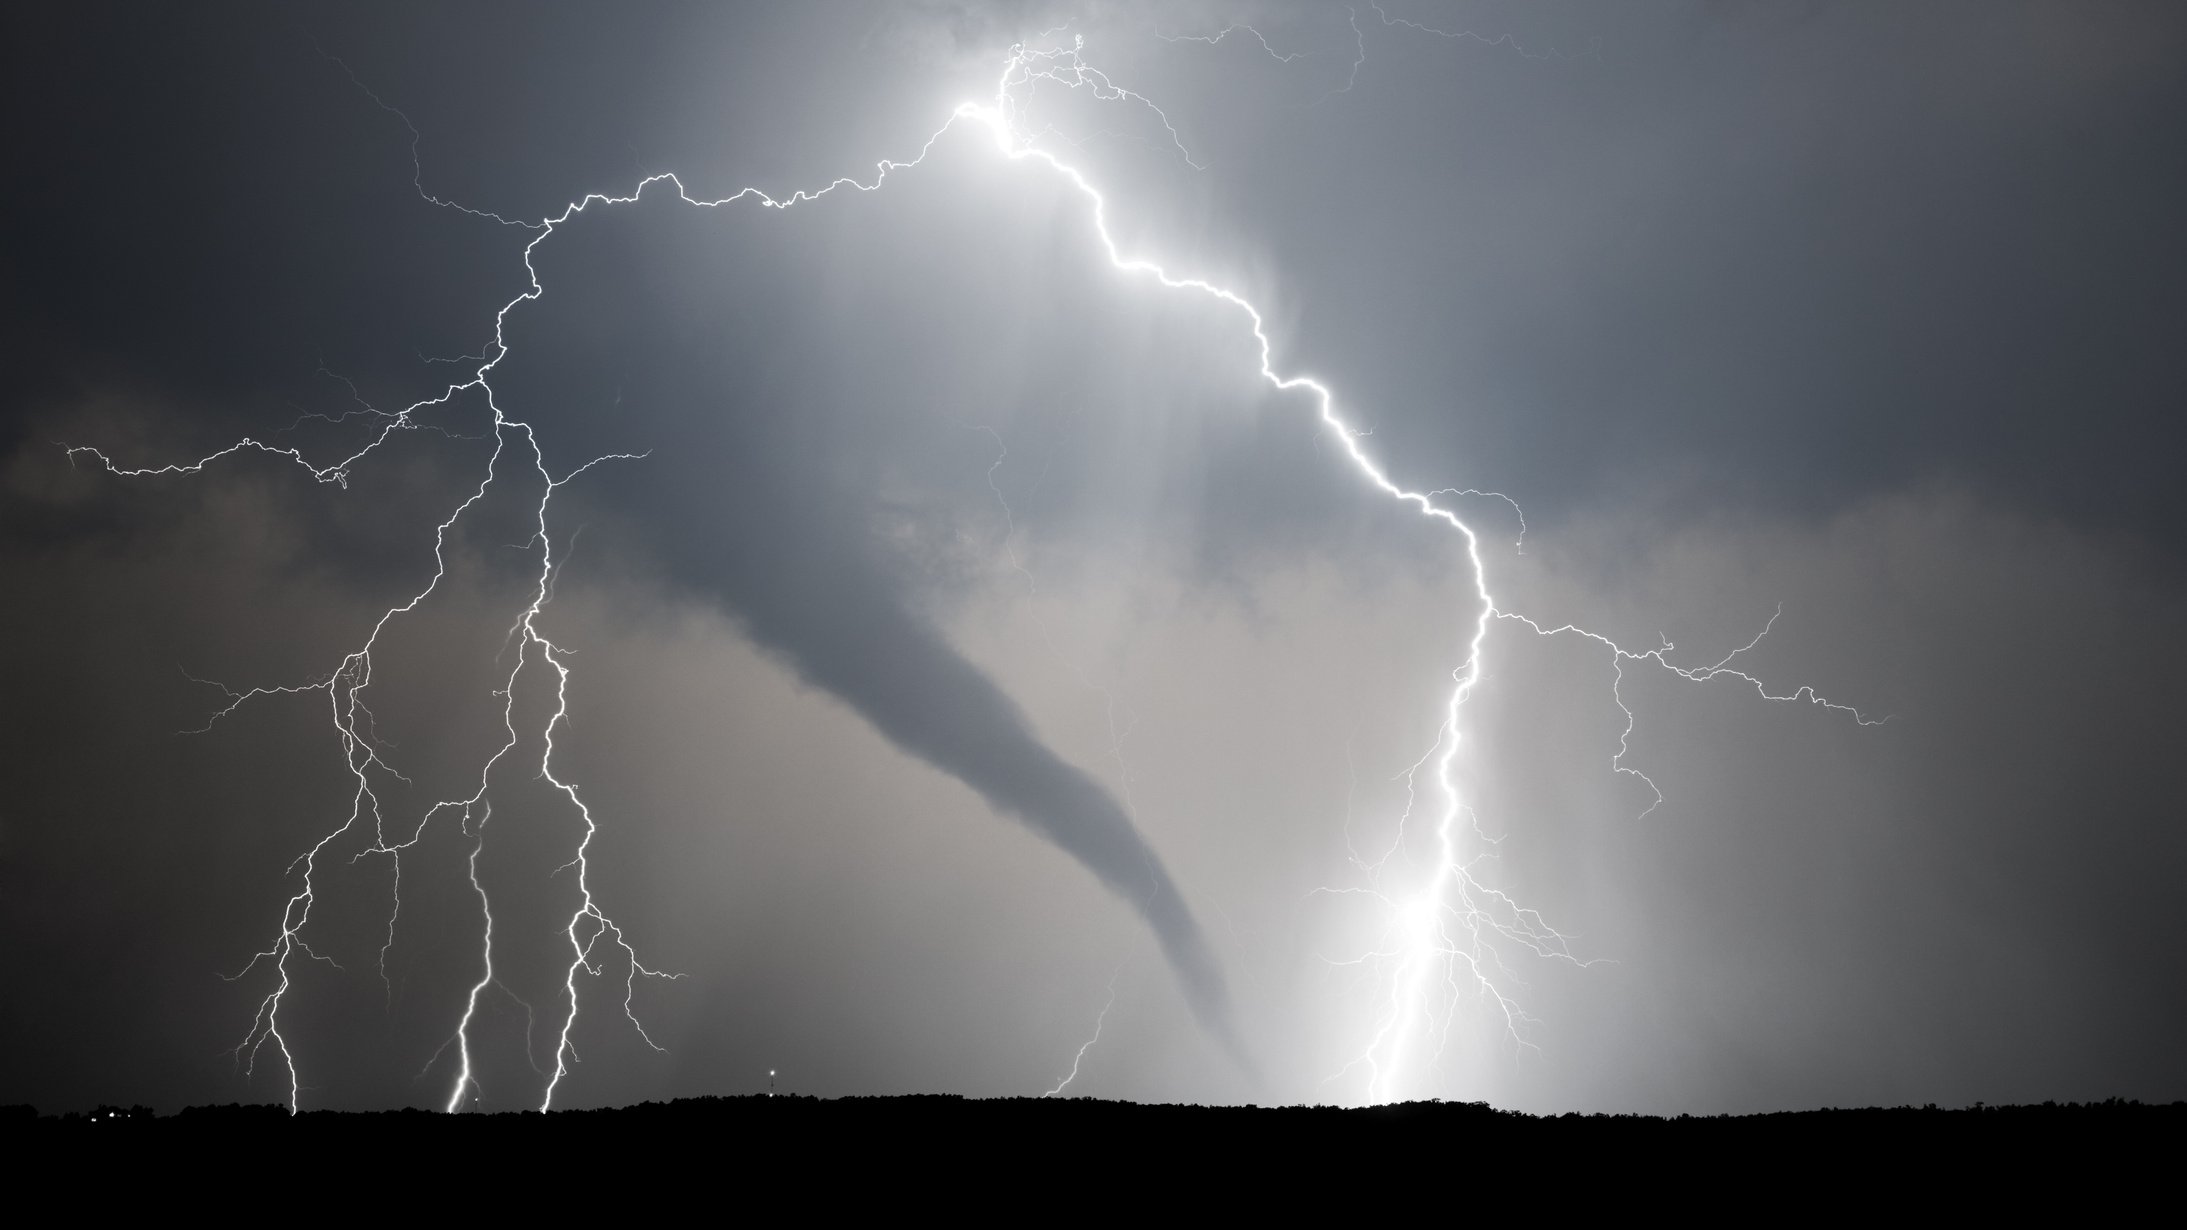 What are the odds of dying in a Tornado?